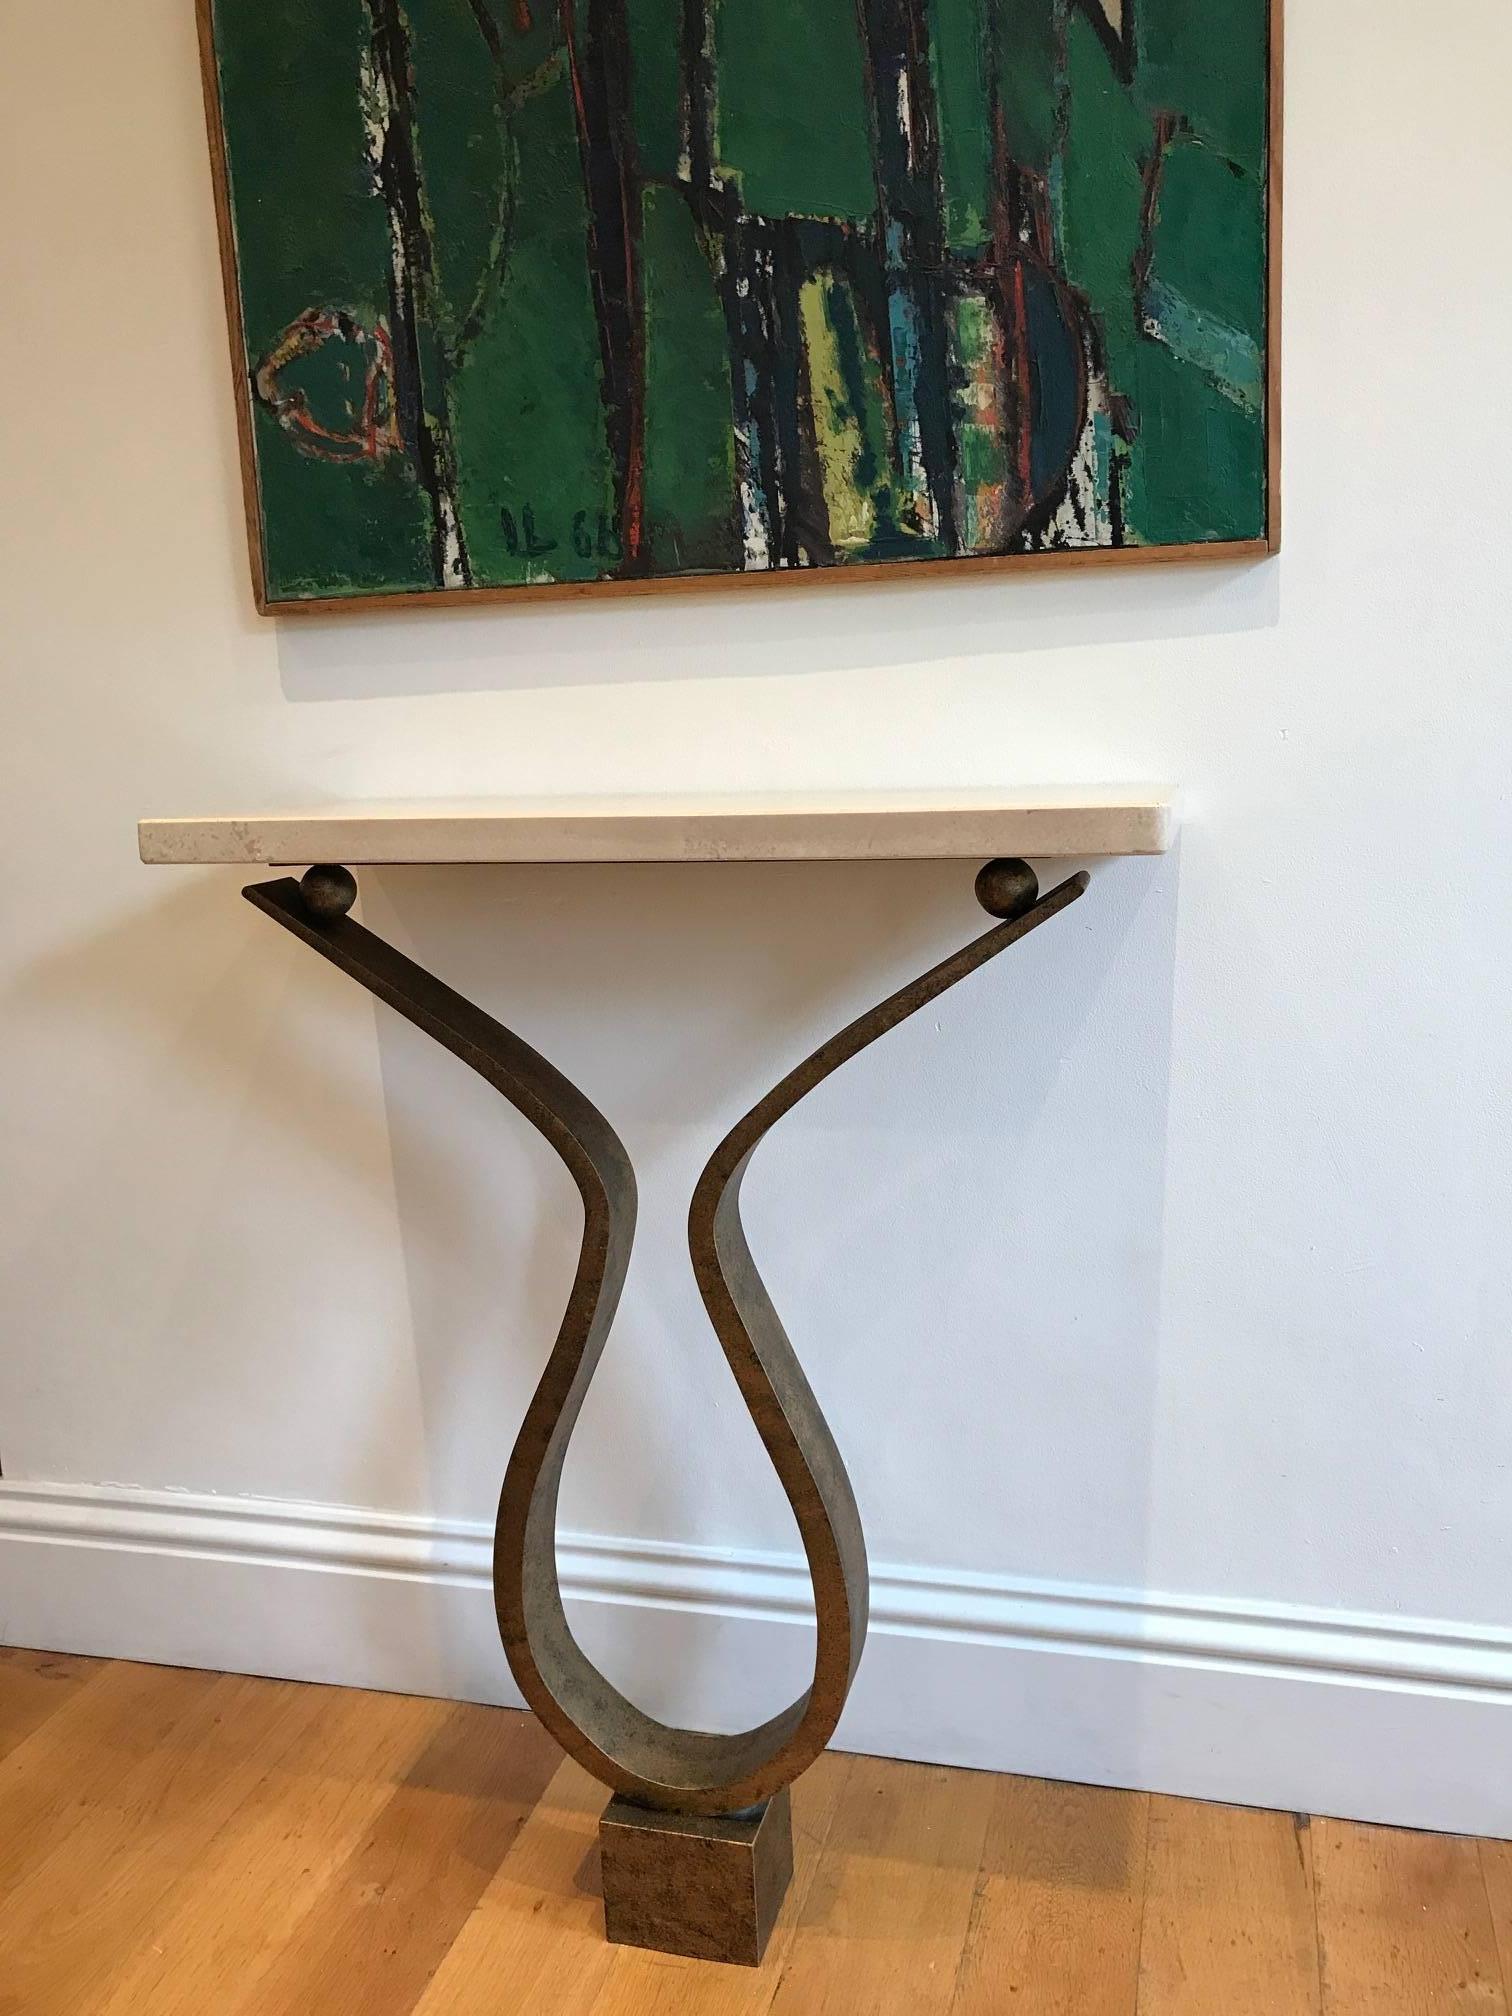 A very elegant bespoke handmade console or side table. The metalwork has a gilt / bronze finish and the top is Italian filled travertine.